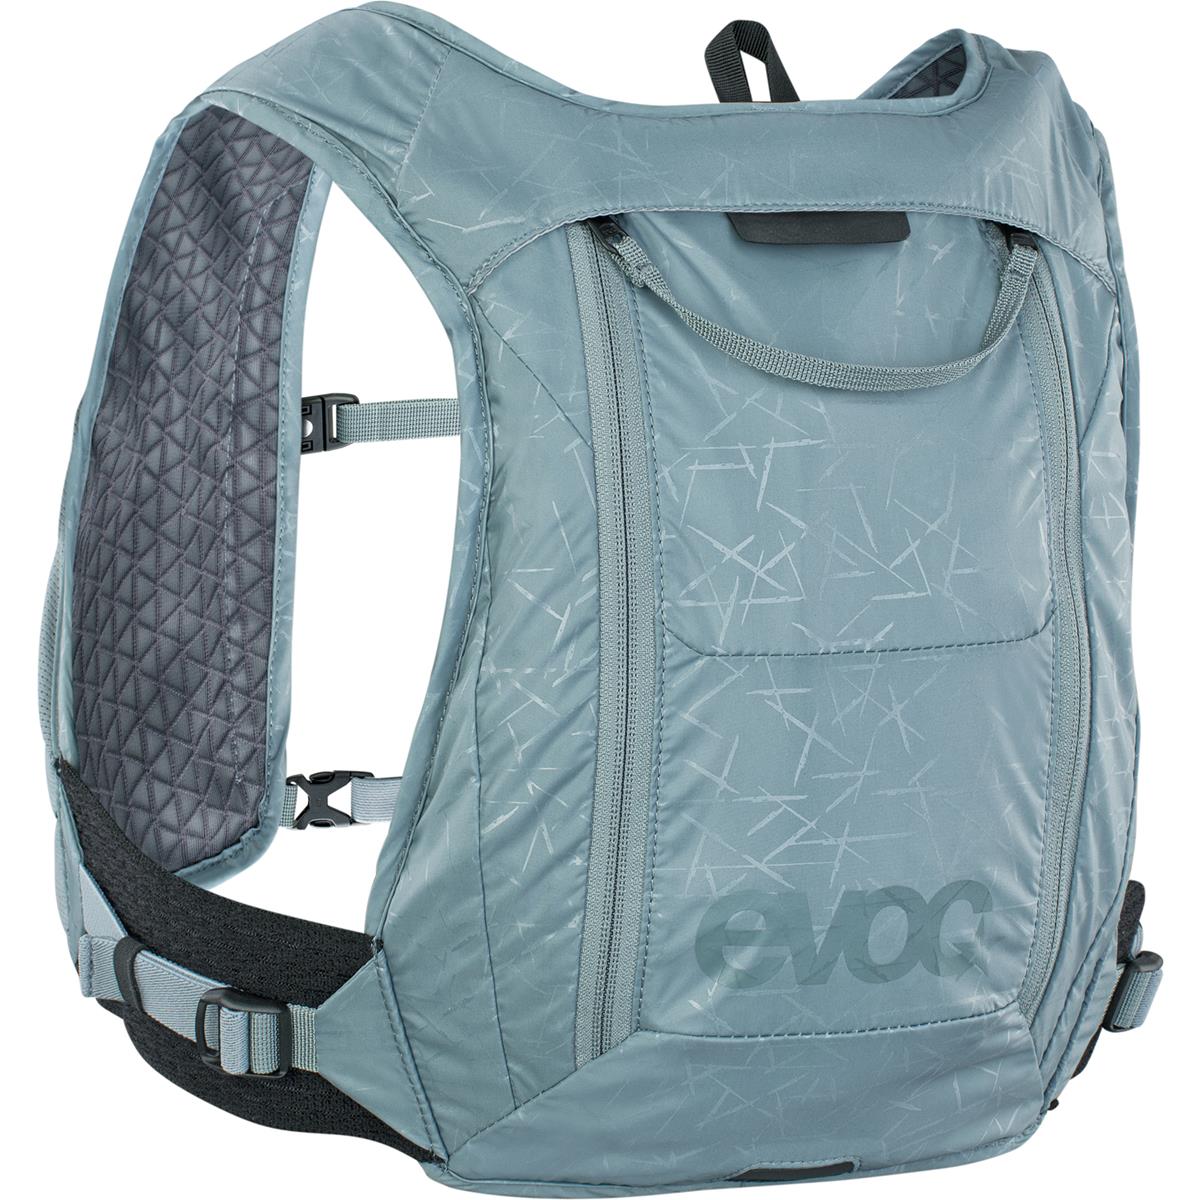 Evoc Backpack with Hydration System Compartment Hydro Pro 1.5 Steel